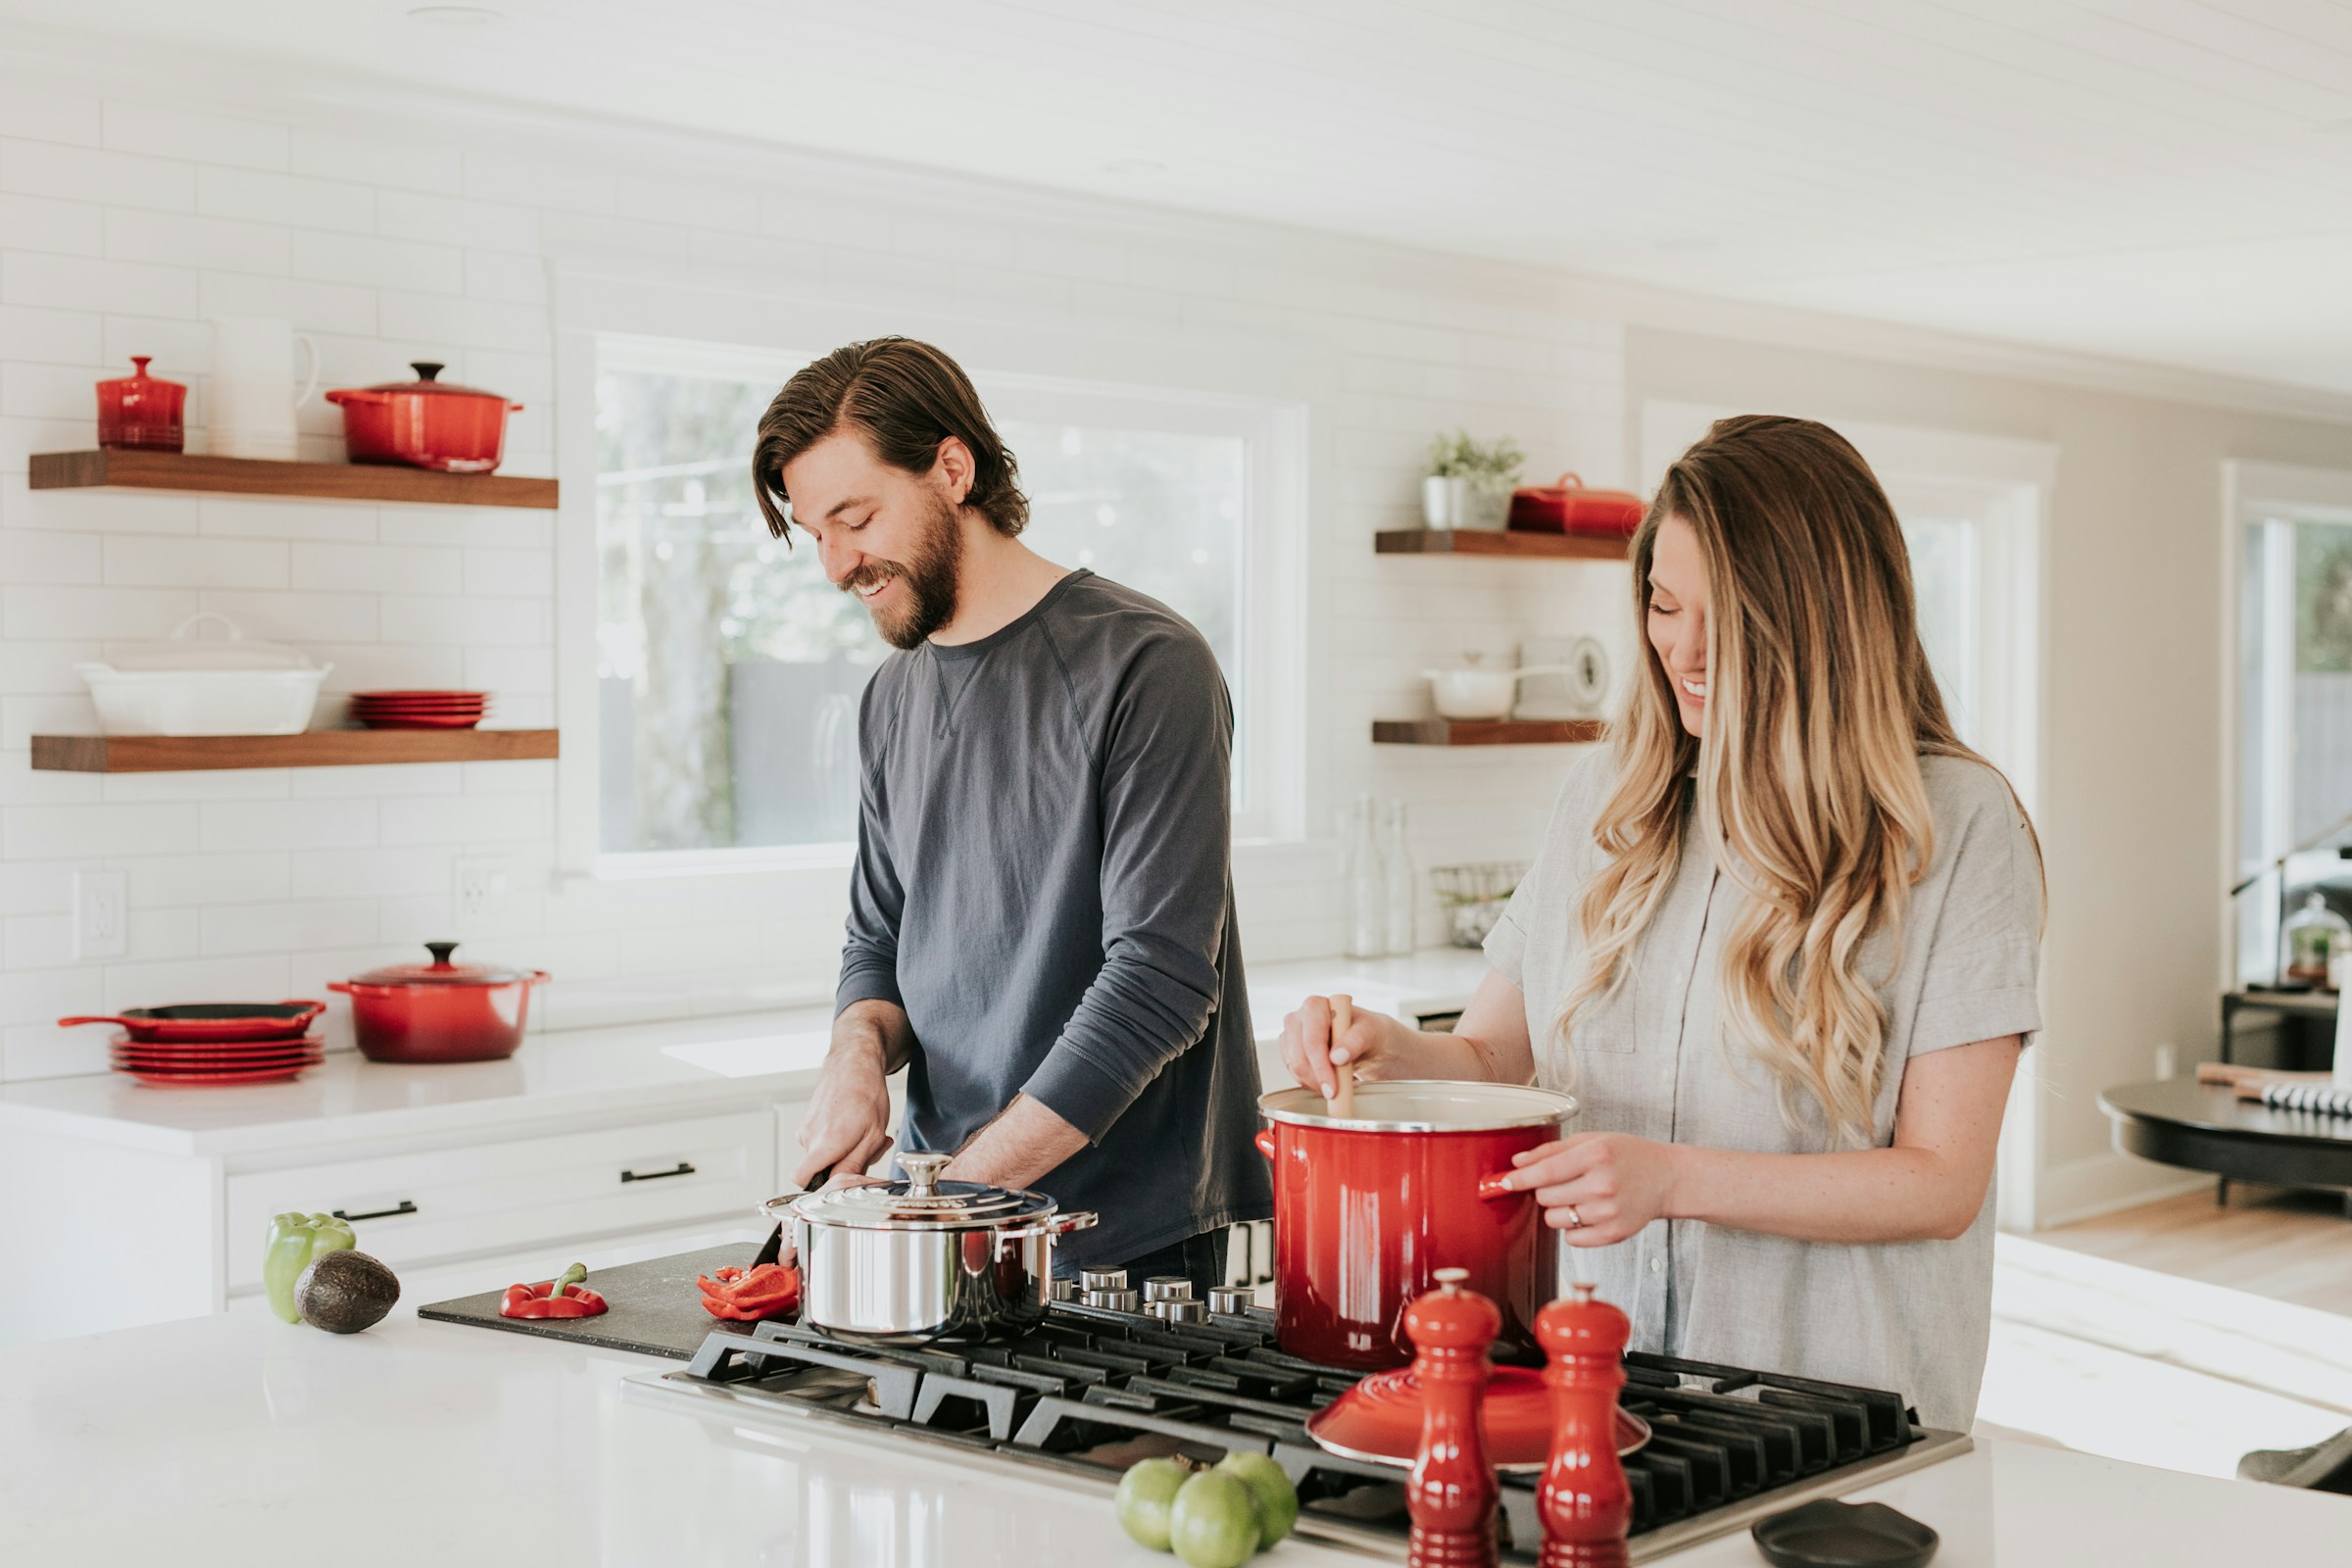 Happy couple cooking together. | Source: Unsplash